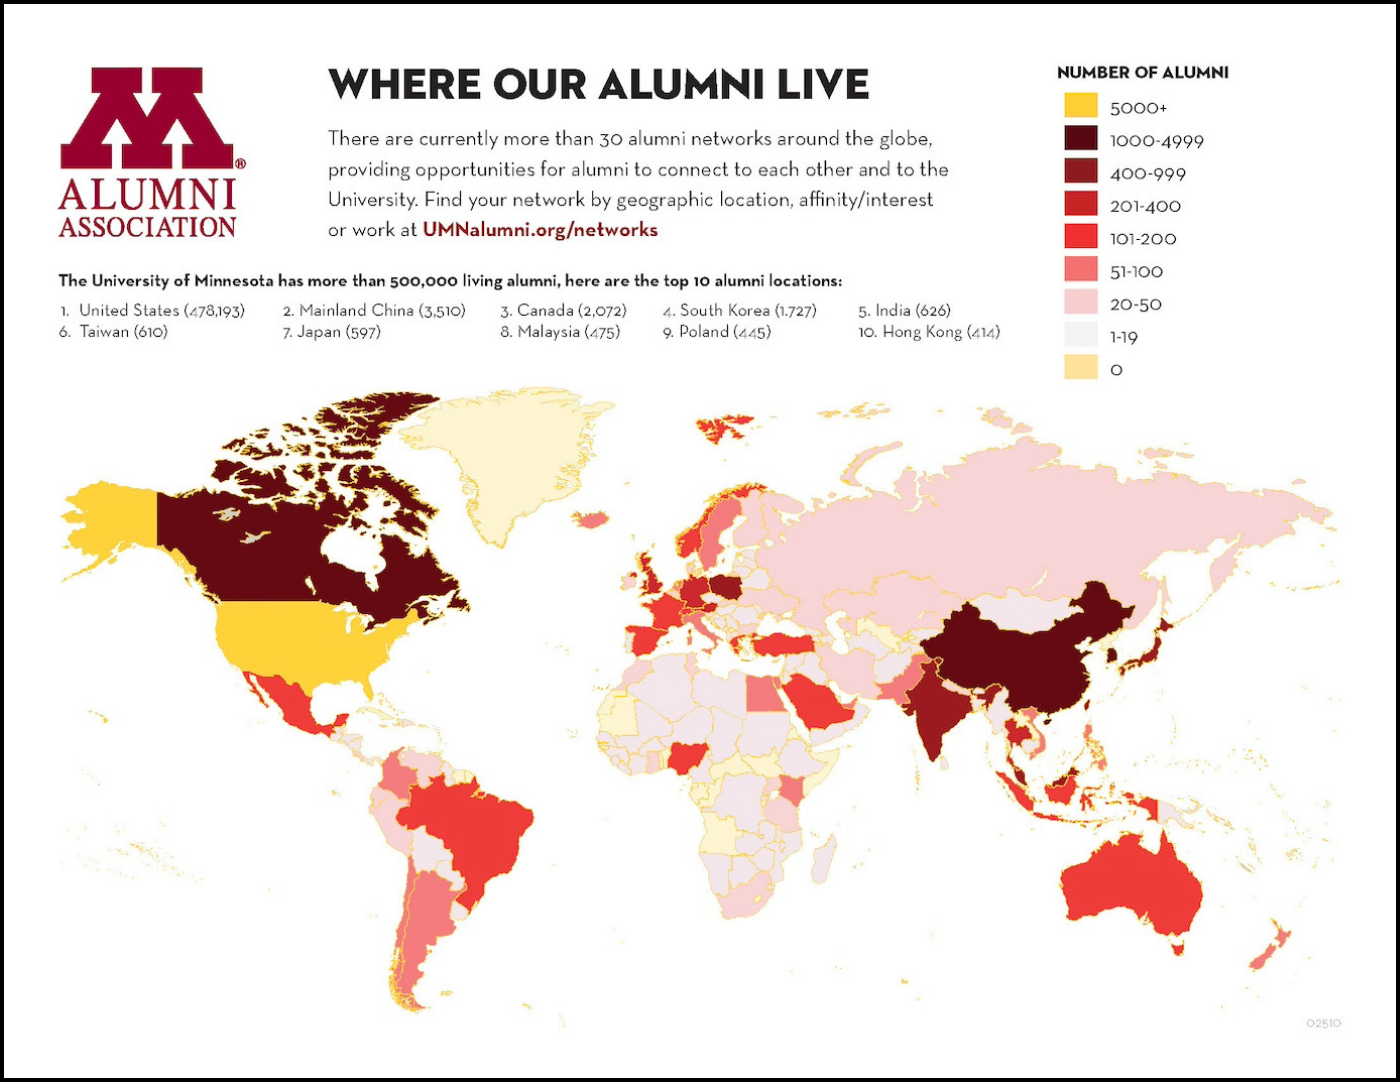 Colorful map illustration and chart indicating where UMN alumni live in the world